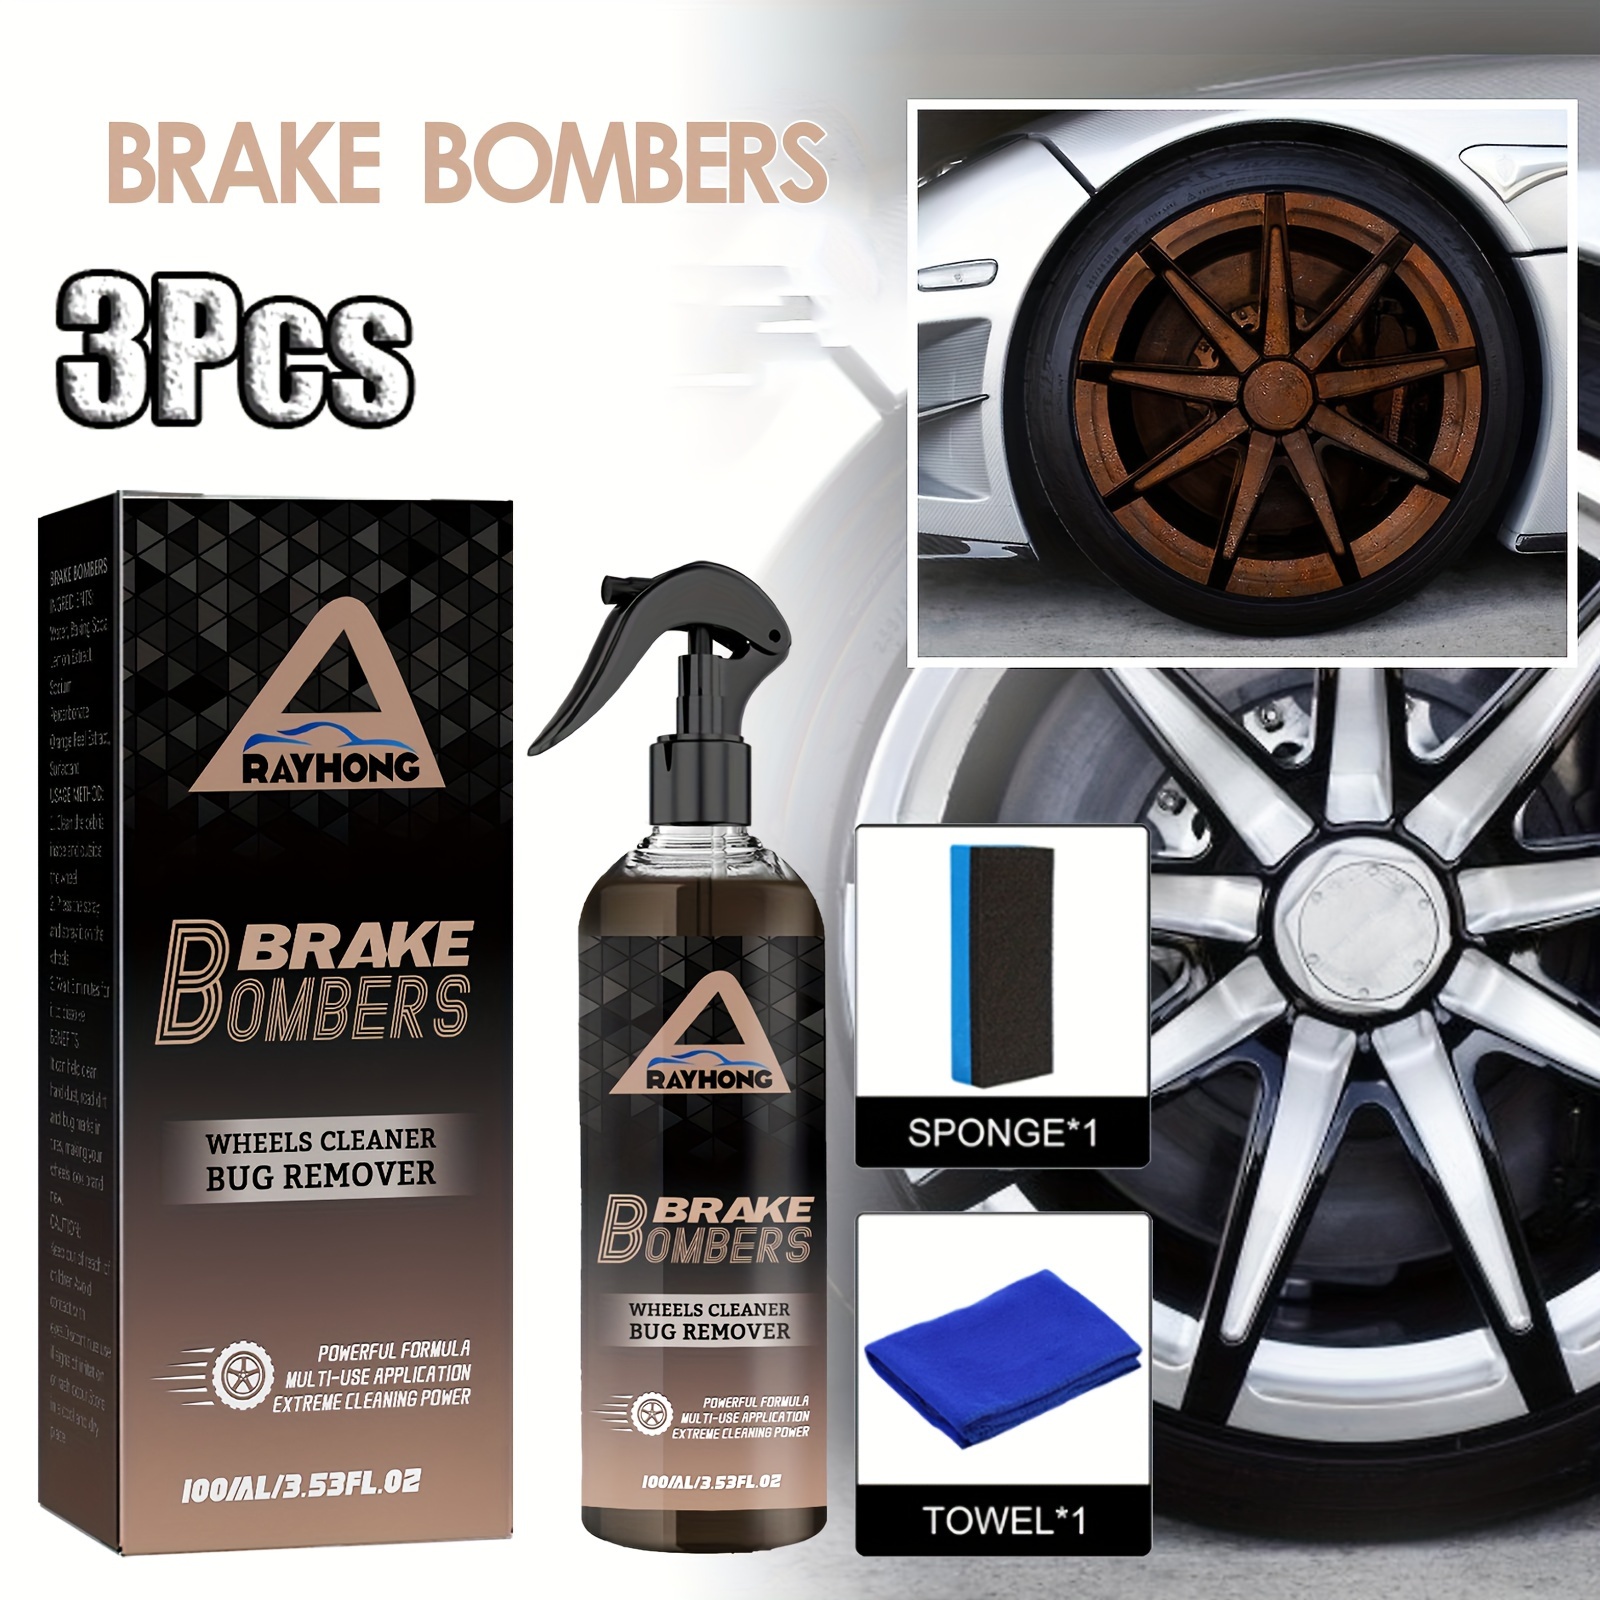 Brake Bomber: Powerful Acid-Free Truck And Car Wheel Cleaner And